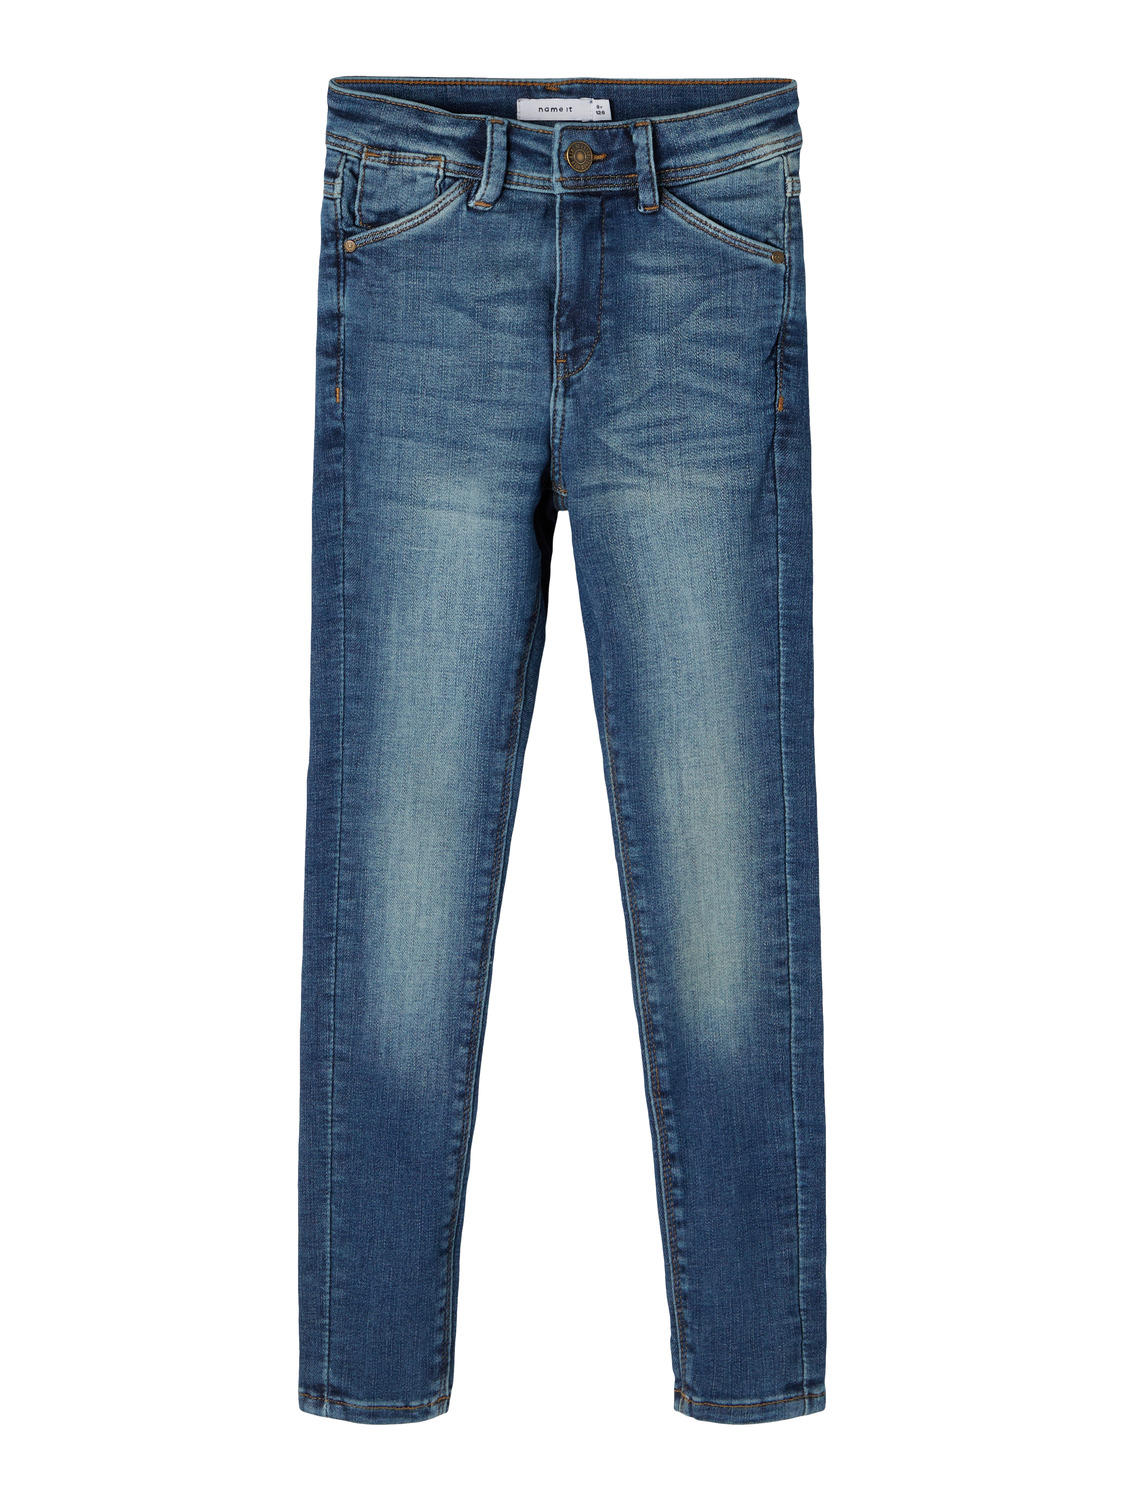 NAME IT Jeans Polly in Blu Scuro 